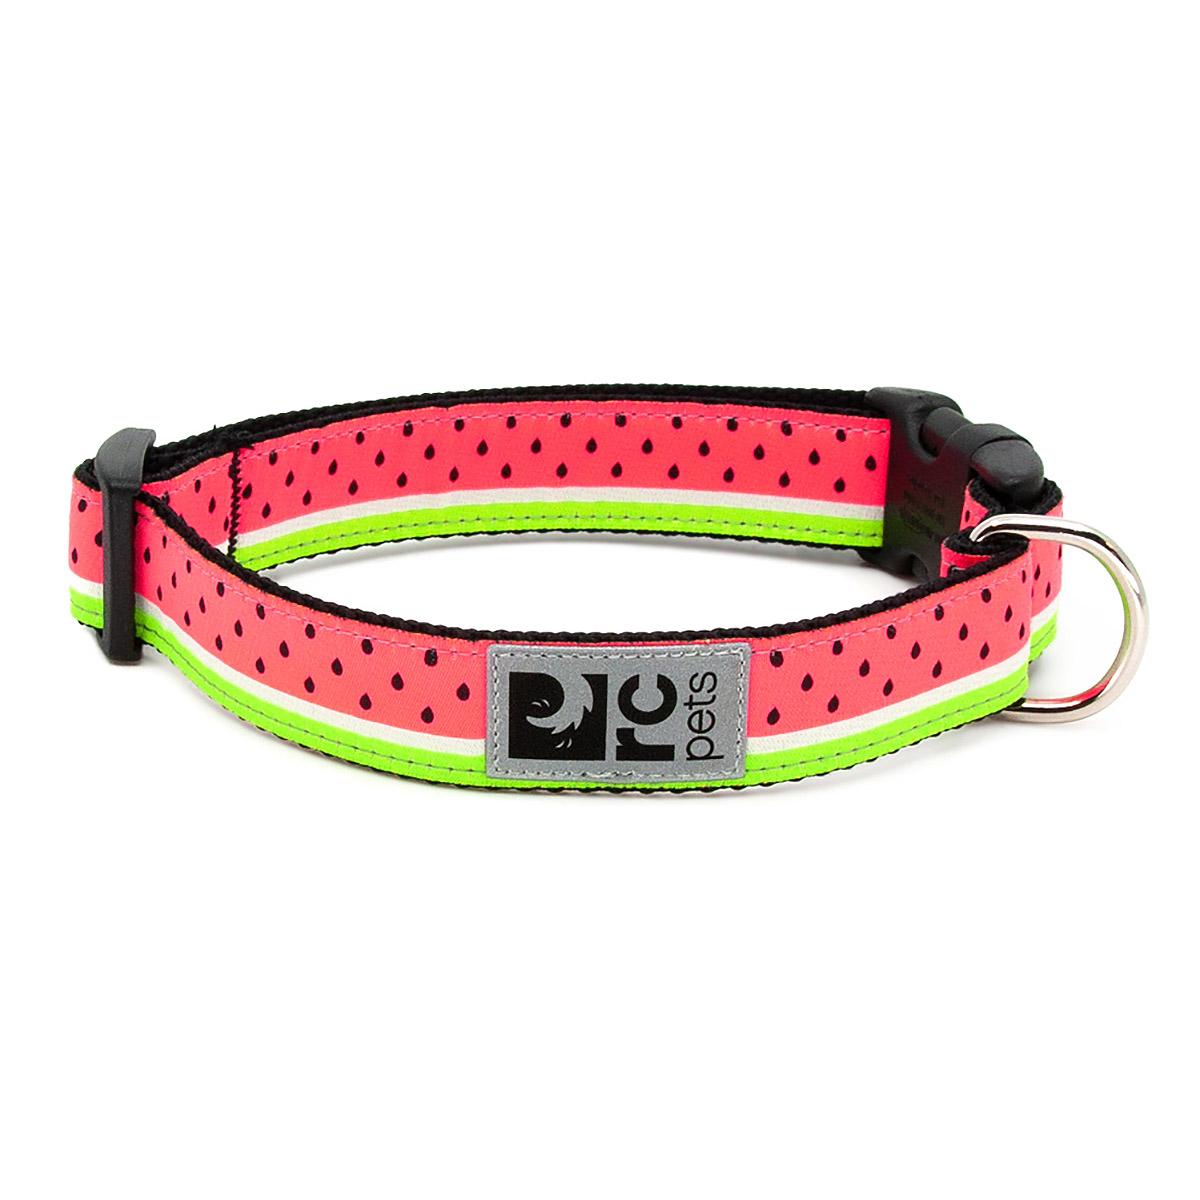 Watermelon Adjustable Clip Dog Collar By RC Pets